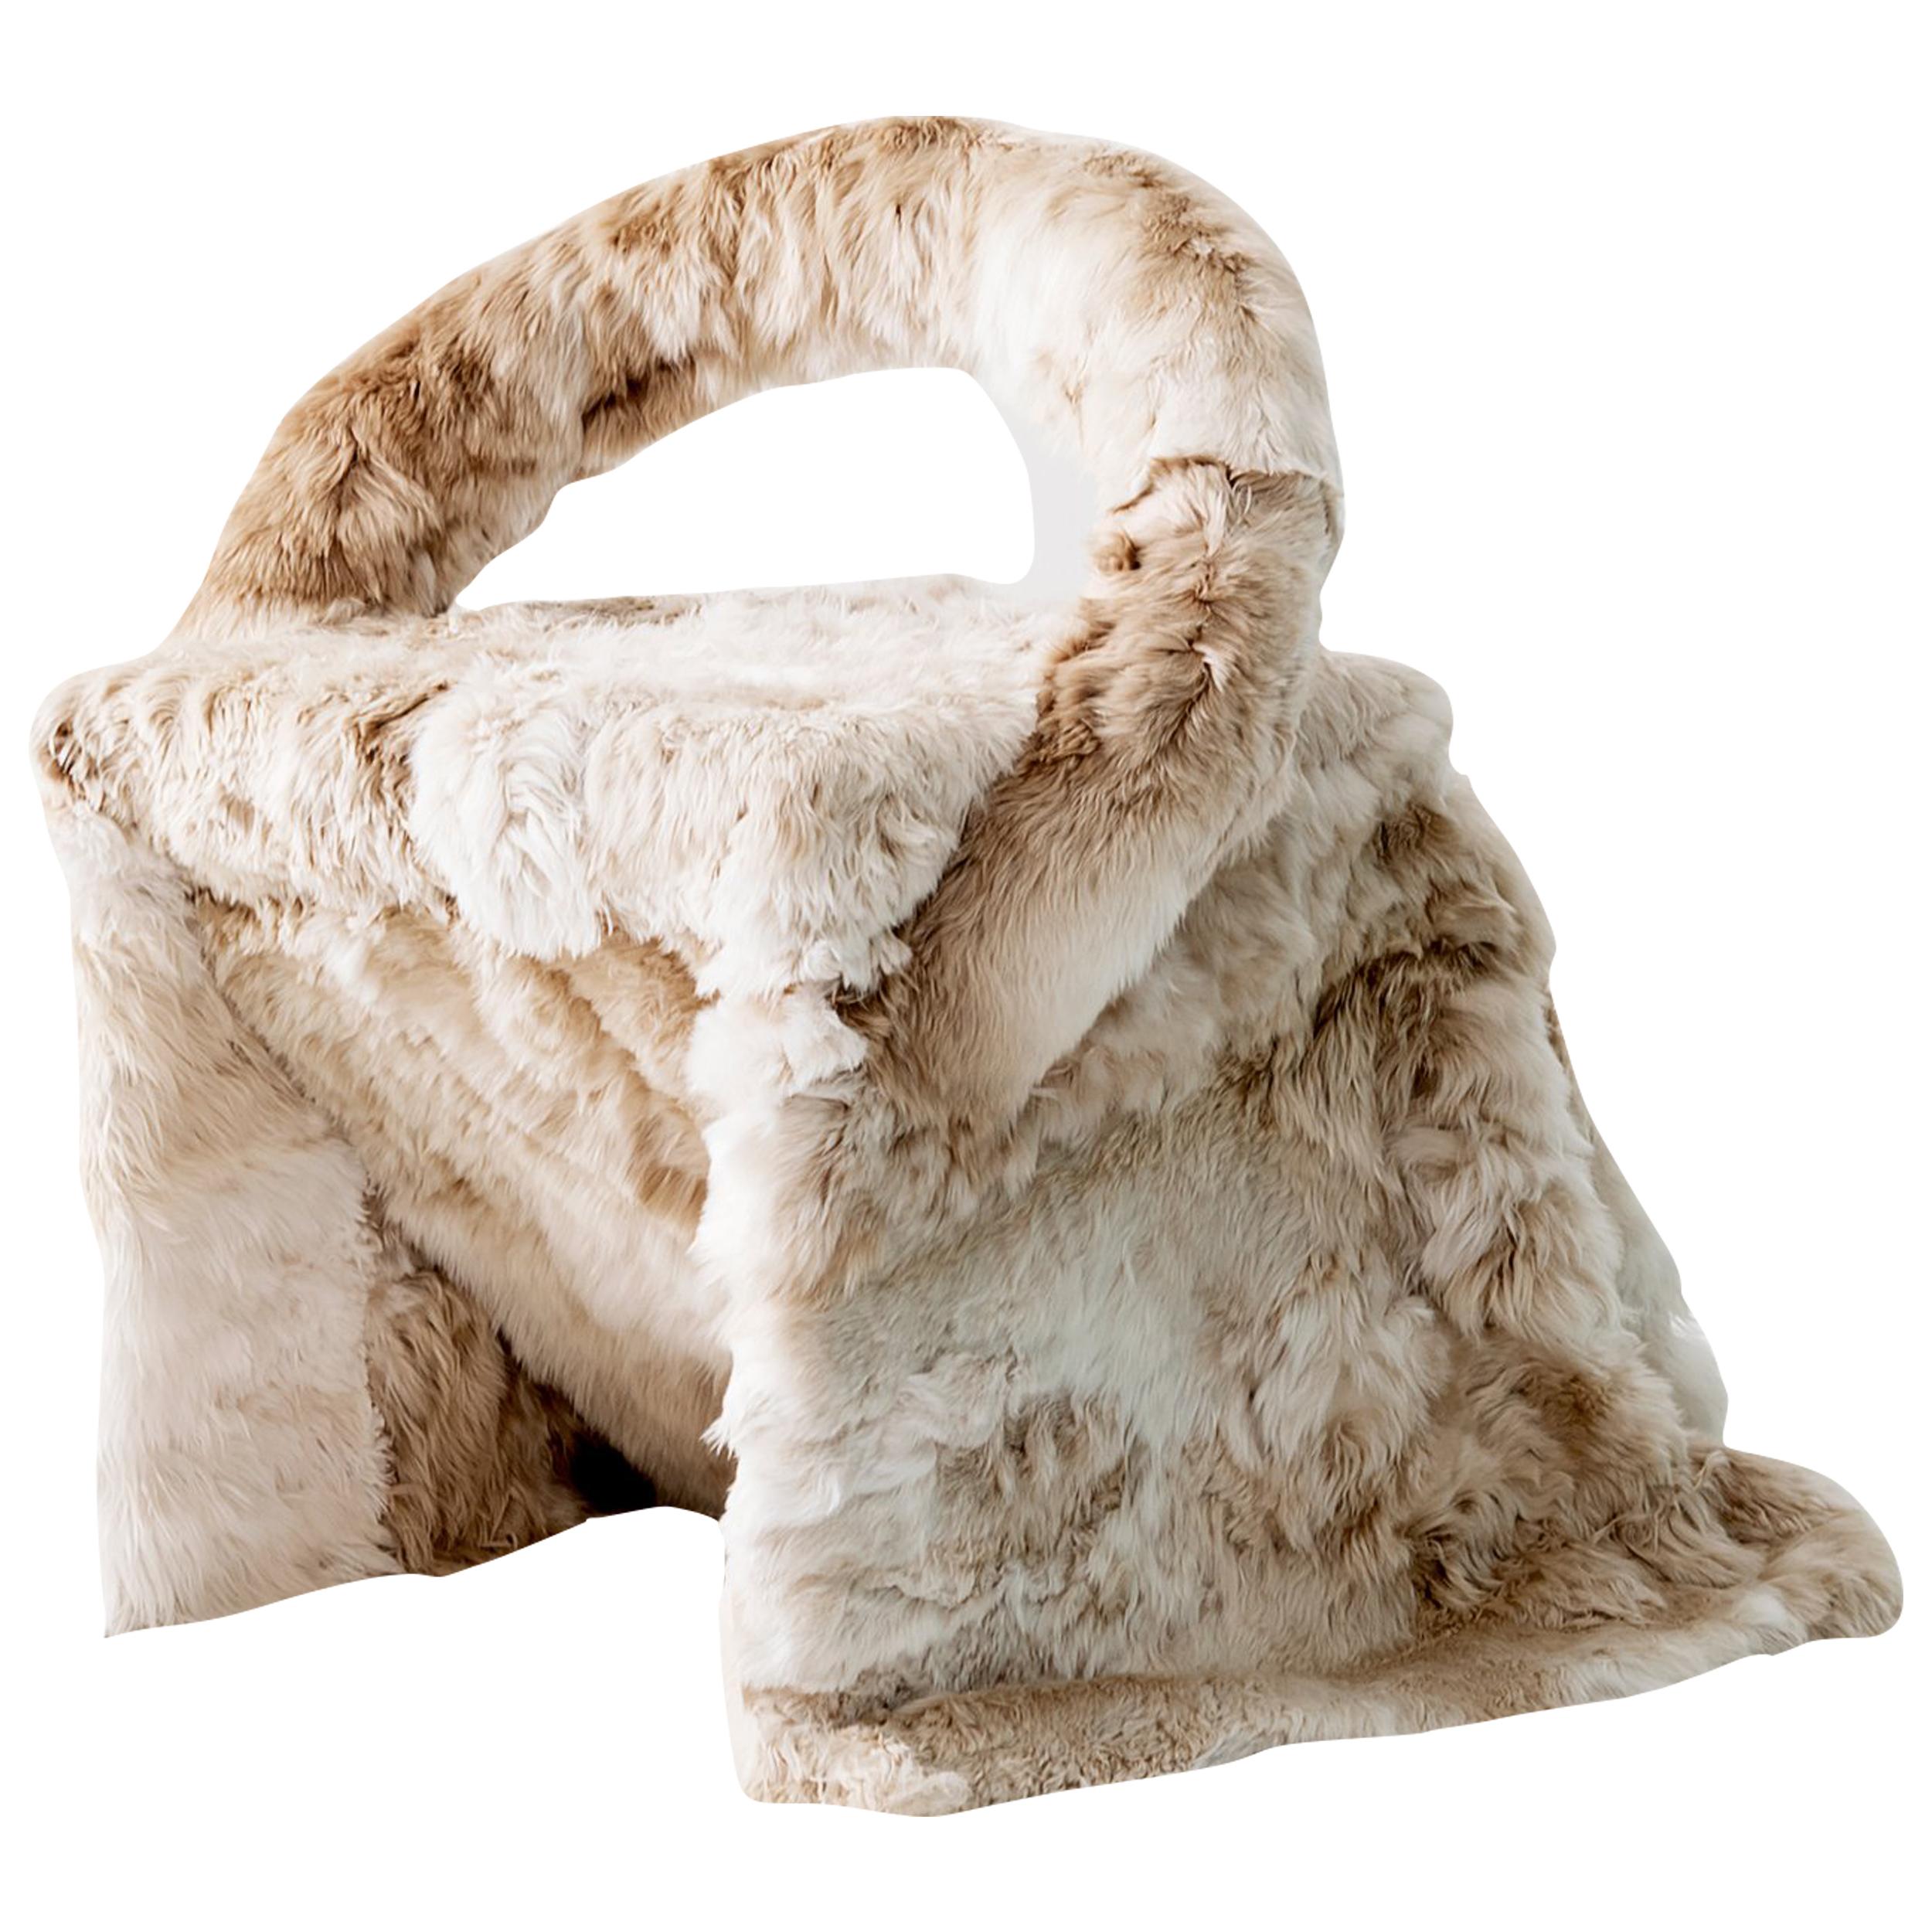 Alpaca Fur Chair or Dining Chair by Guillermo Santomà, Spain 2018 Fur upholstery